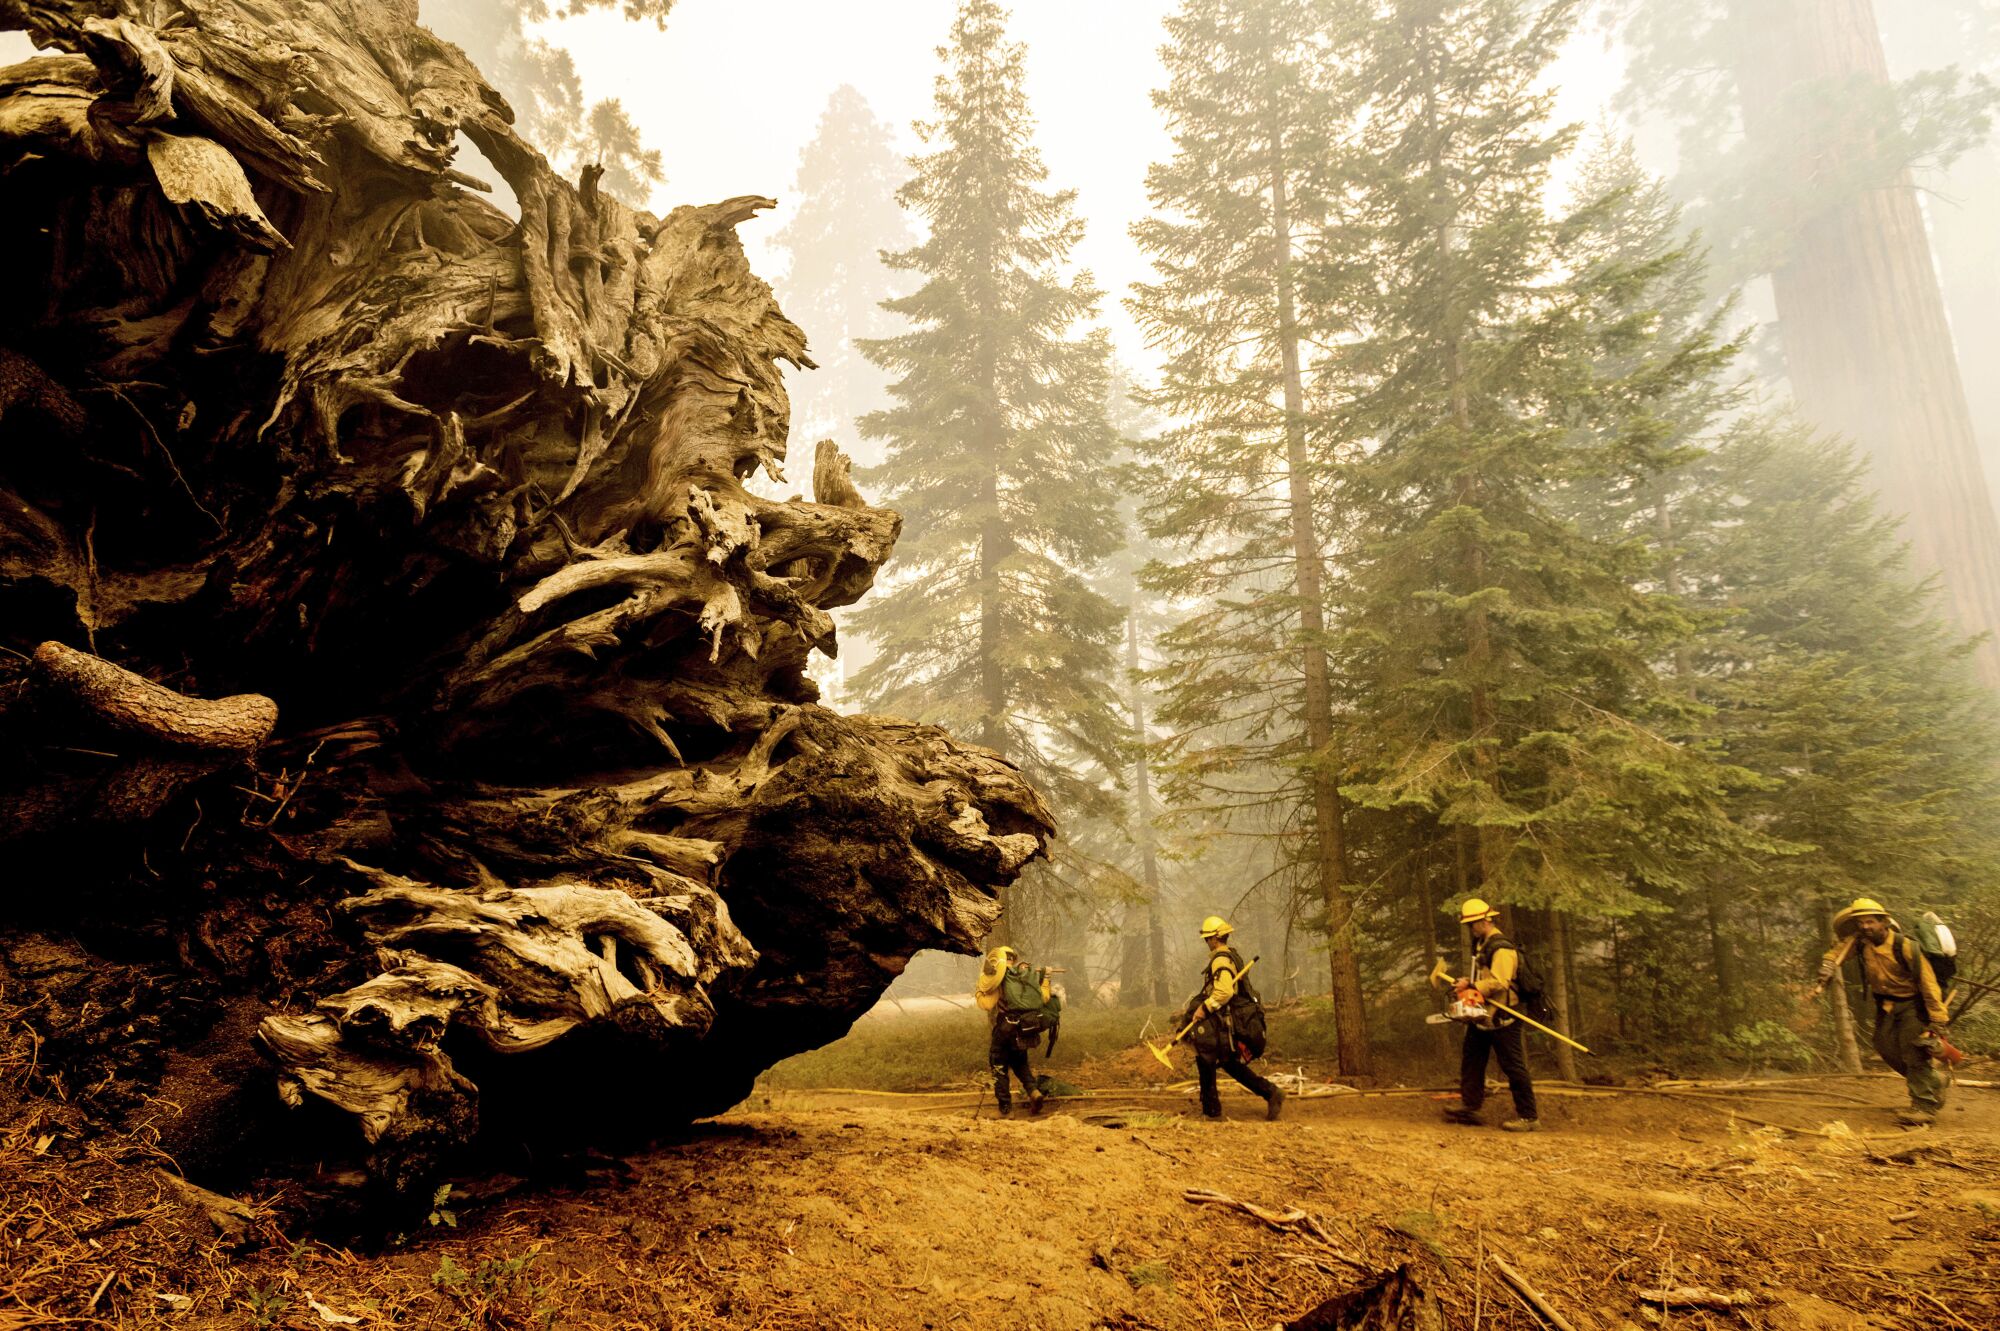 Firefighters battle the Windy fire in the Trail of 100 Giants grove of Sequoia National Forest.